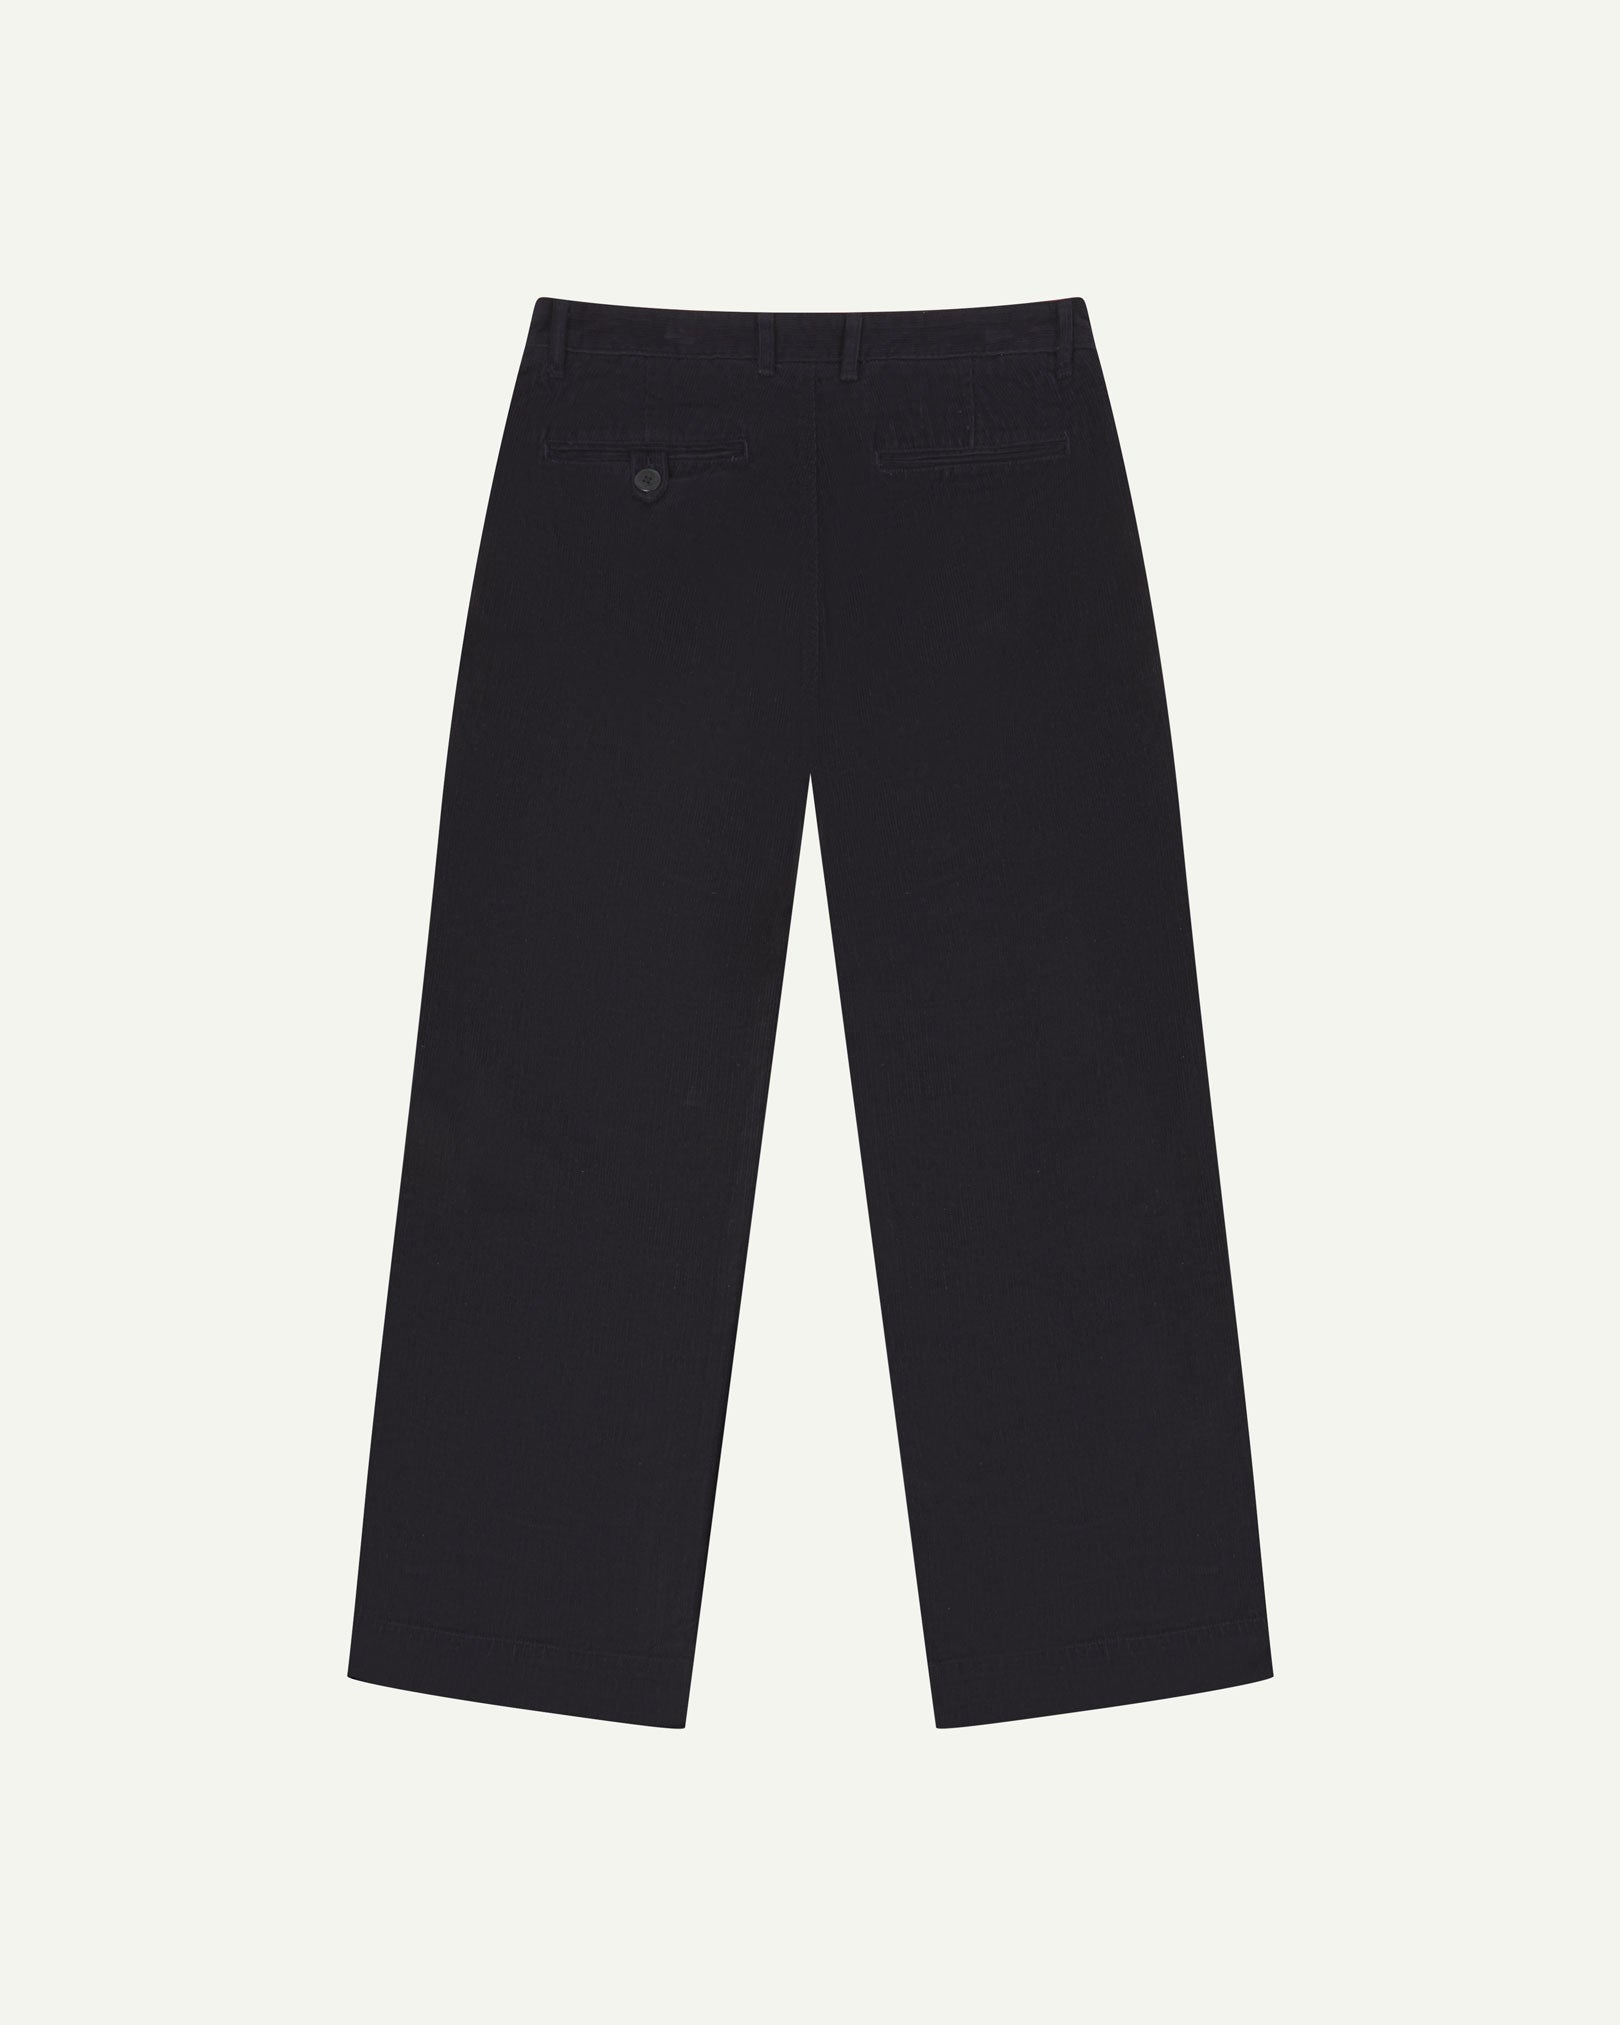 Back flat view of Uskees 5018 cord boat pants in midnight blue showing belt loops, back pockets and simple, vintage silhouette.